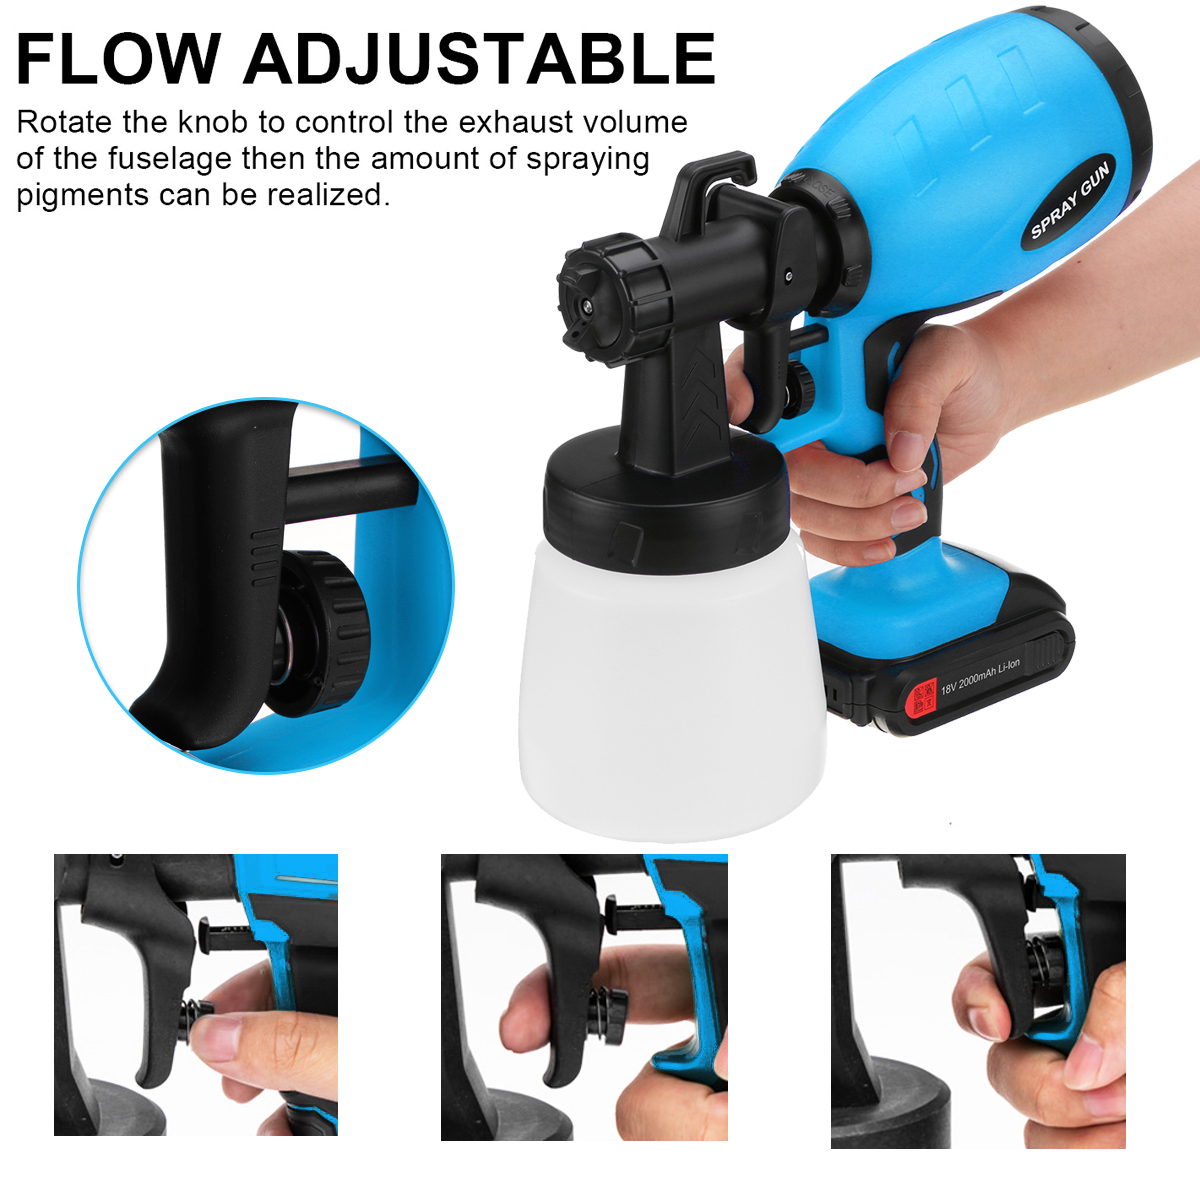 2000mAh-Portable-Electric-Paint-Sprayer-Wireless-Handheld-Spray-Guns-Home-Indoor-Fence-Painting-Tool-1851241-3